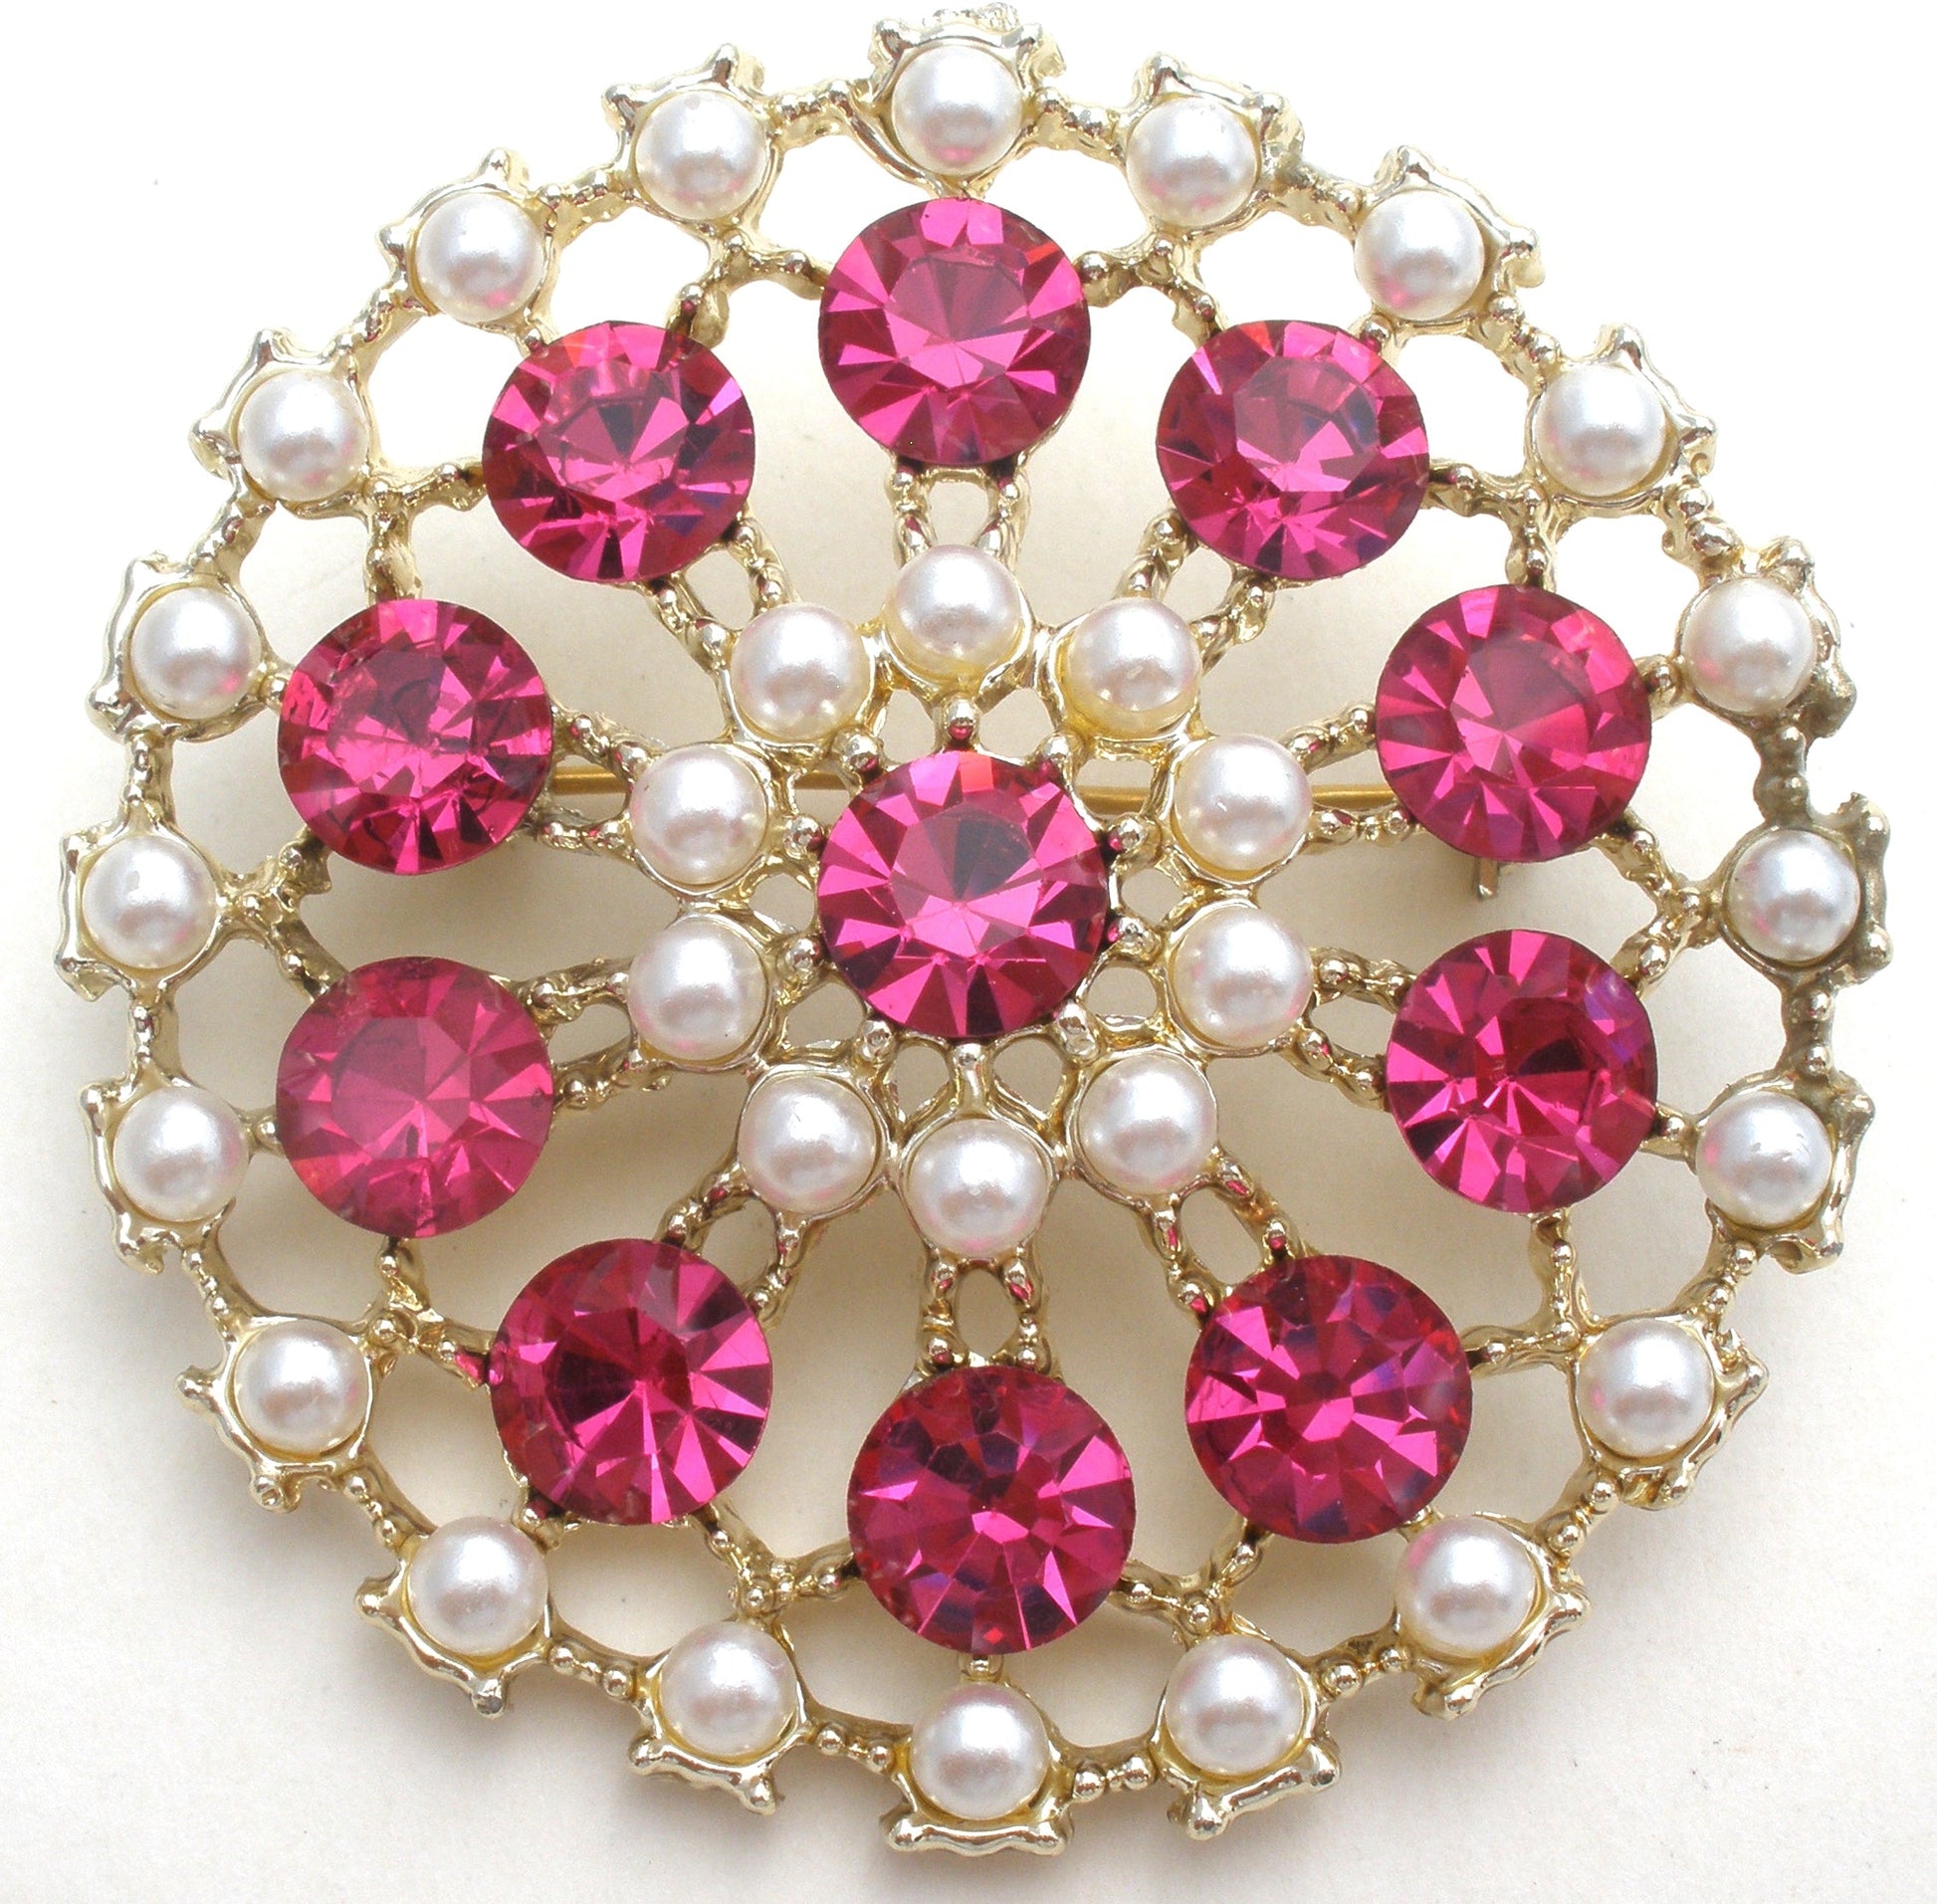 Fuchsia Pink & Pearl Brooch Pin Vintage - The Jewelry Lady's Store